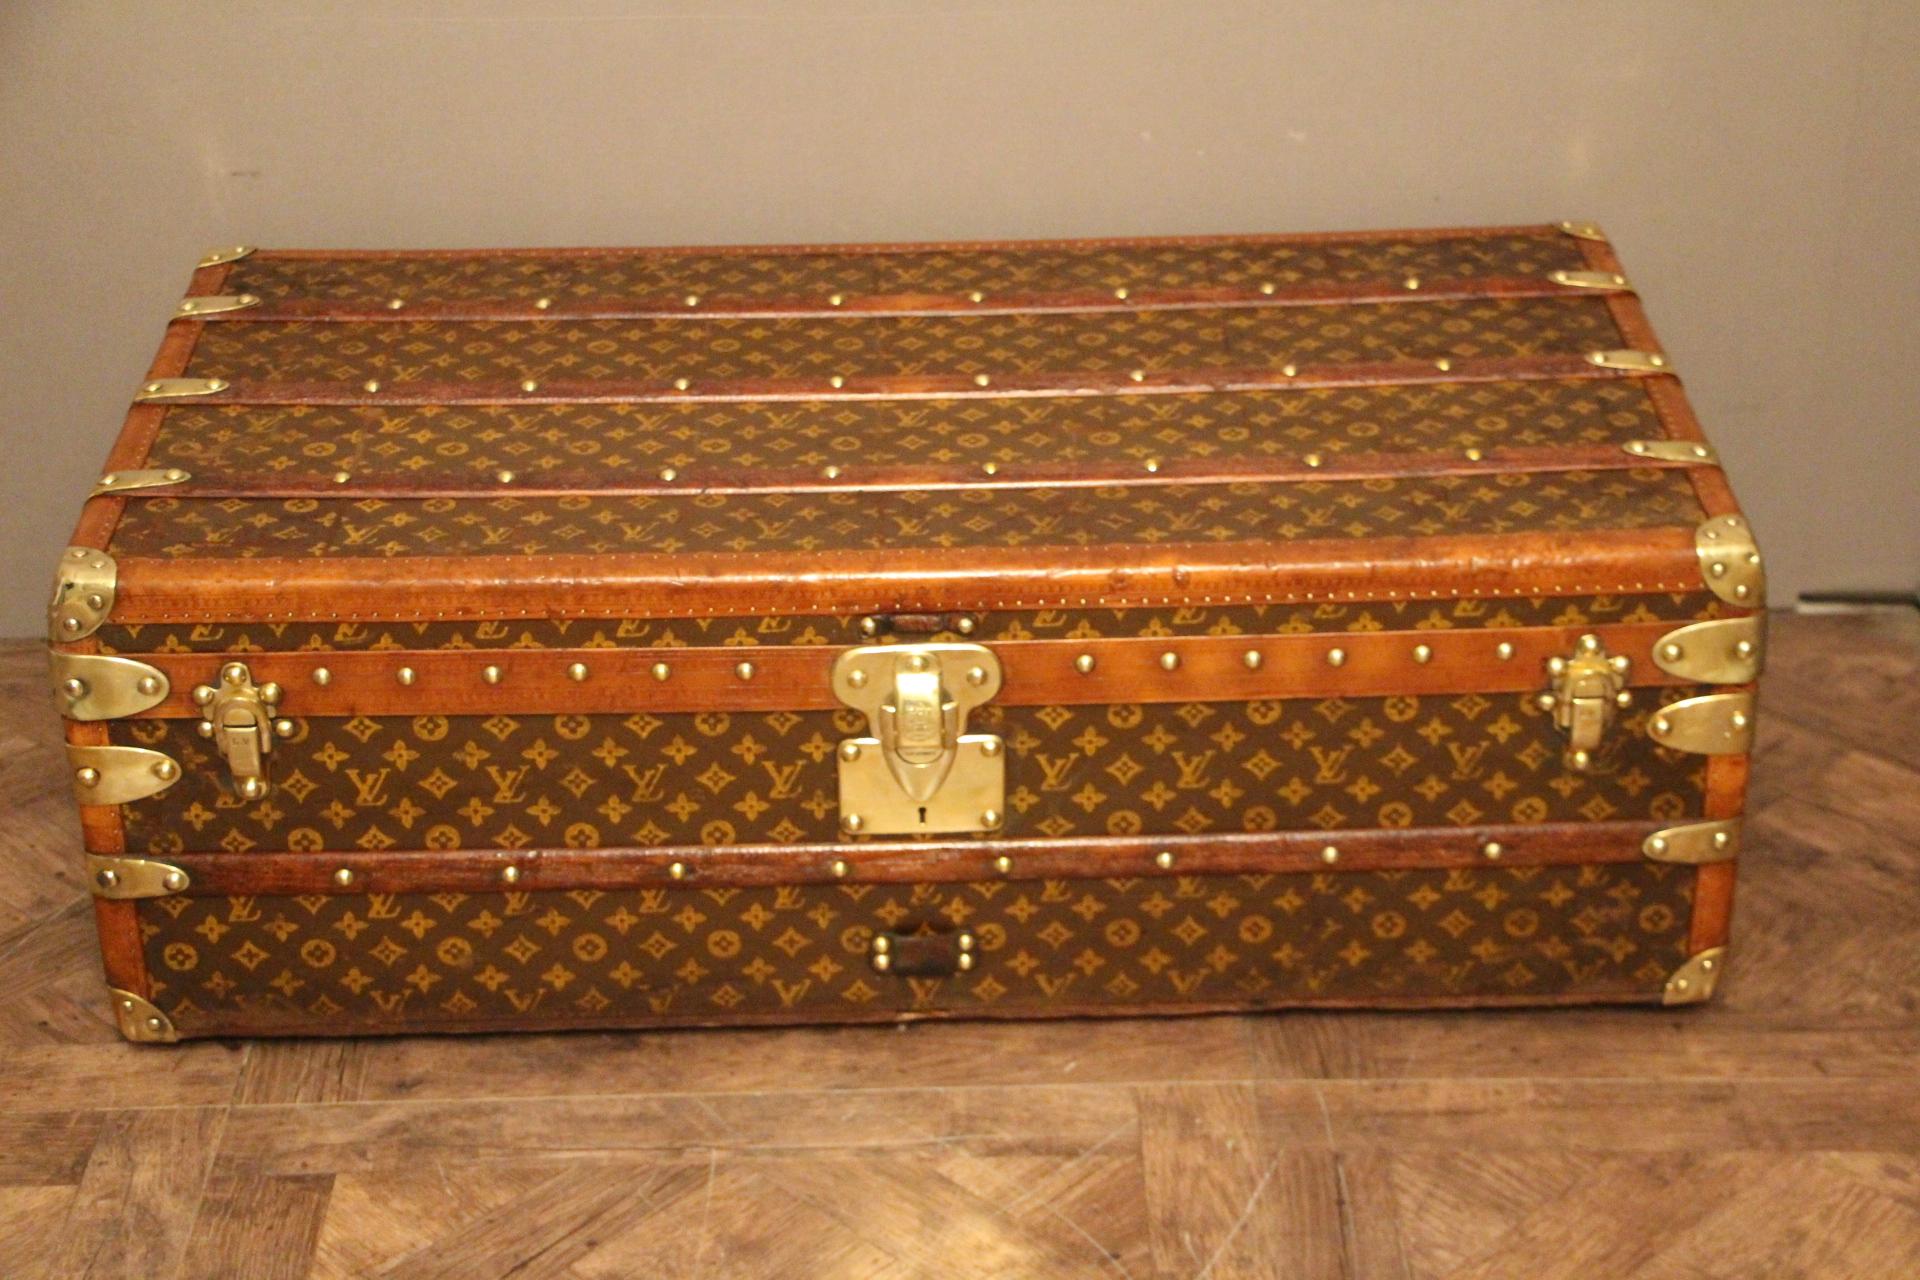 This beautiful Louis Vuitton trunk features stenciled hand painted monogramm canvas and lozine trim.
All solid brass LV stamped studs and locks as well as solid brass corners
Leather handles on each side.
Its interior is all original except that